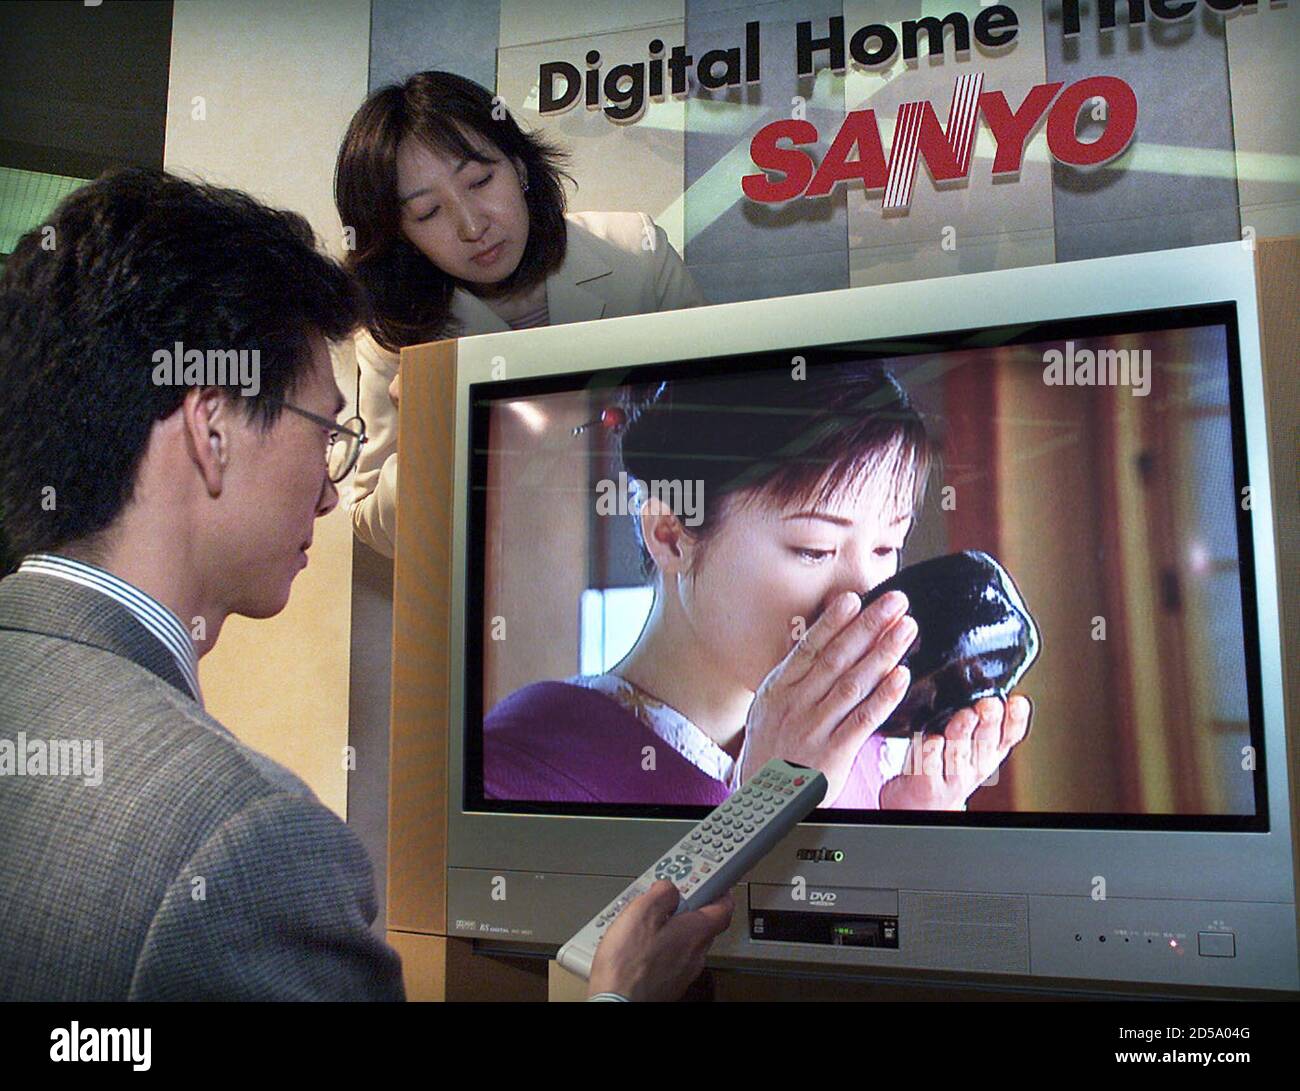 Employees of Sanyo Electric Co demonstrate the company's new 36-inch  broadcasting satellite digital Hi-Vision (high definition) TV Vizon, the  industry's first with a built-in digital Hi-Vision tuner, at the unveiling  of the